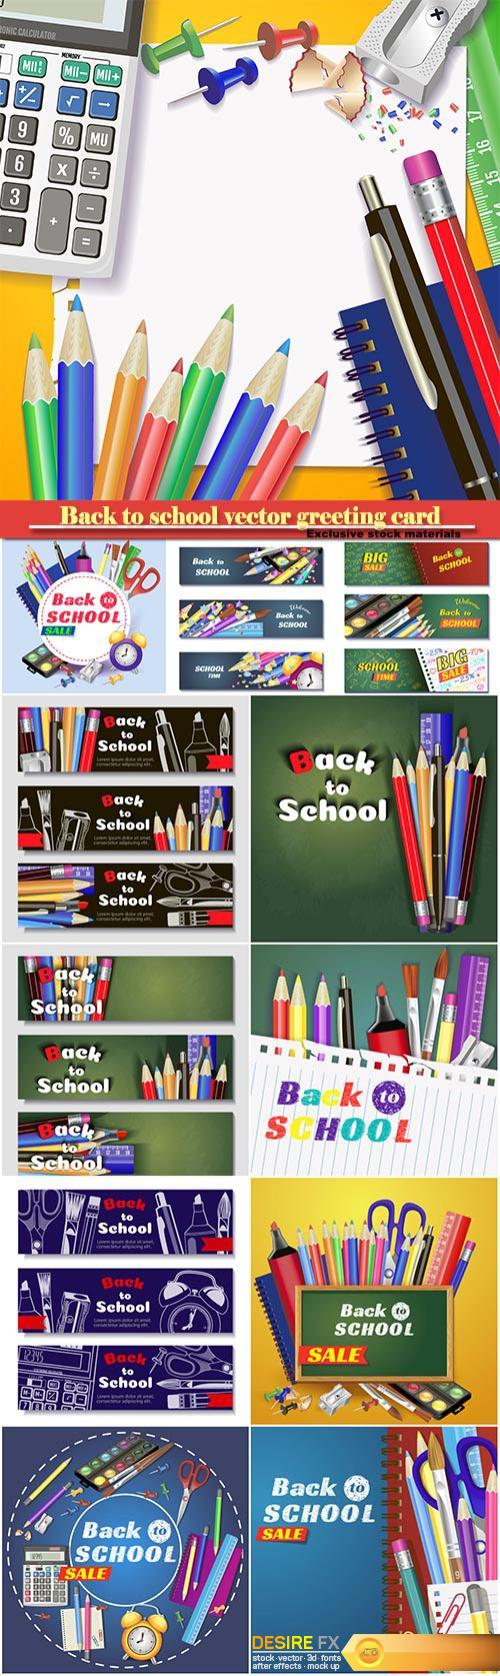 Back to school vector greeting card # 8